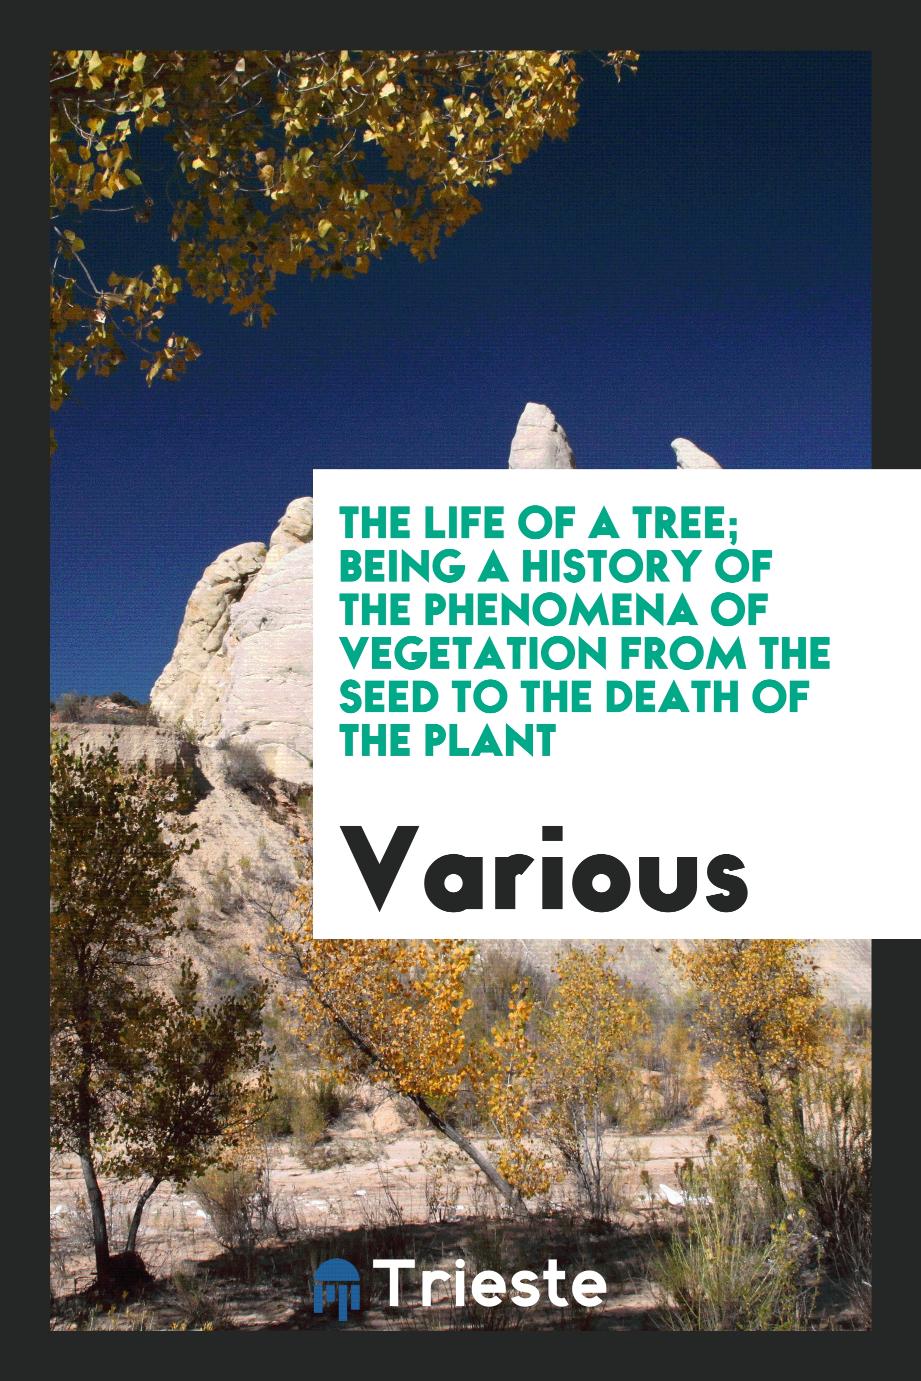 The life of a tree; being a history of the phenomena of vegetation from the seed to the death of the plant